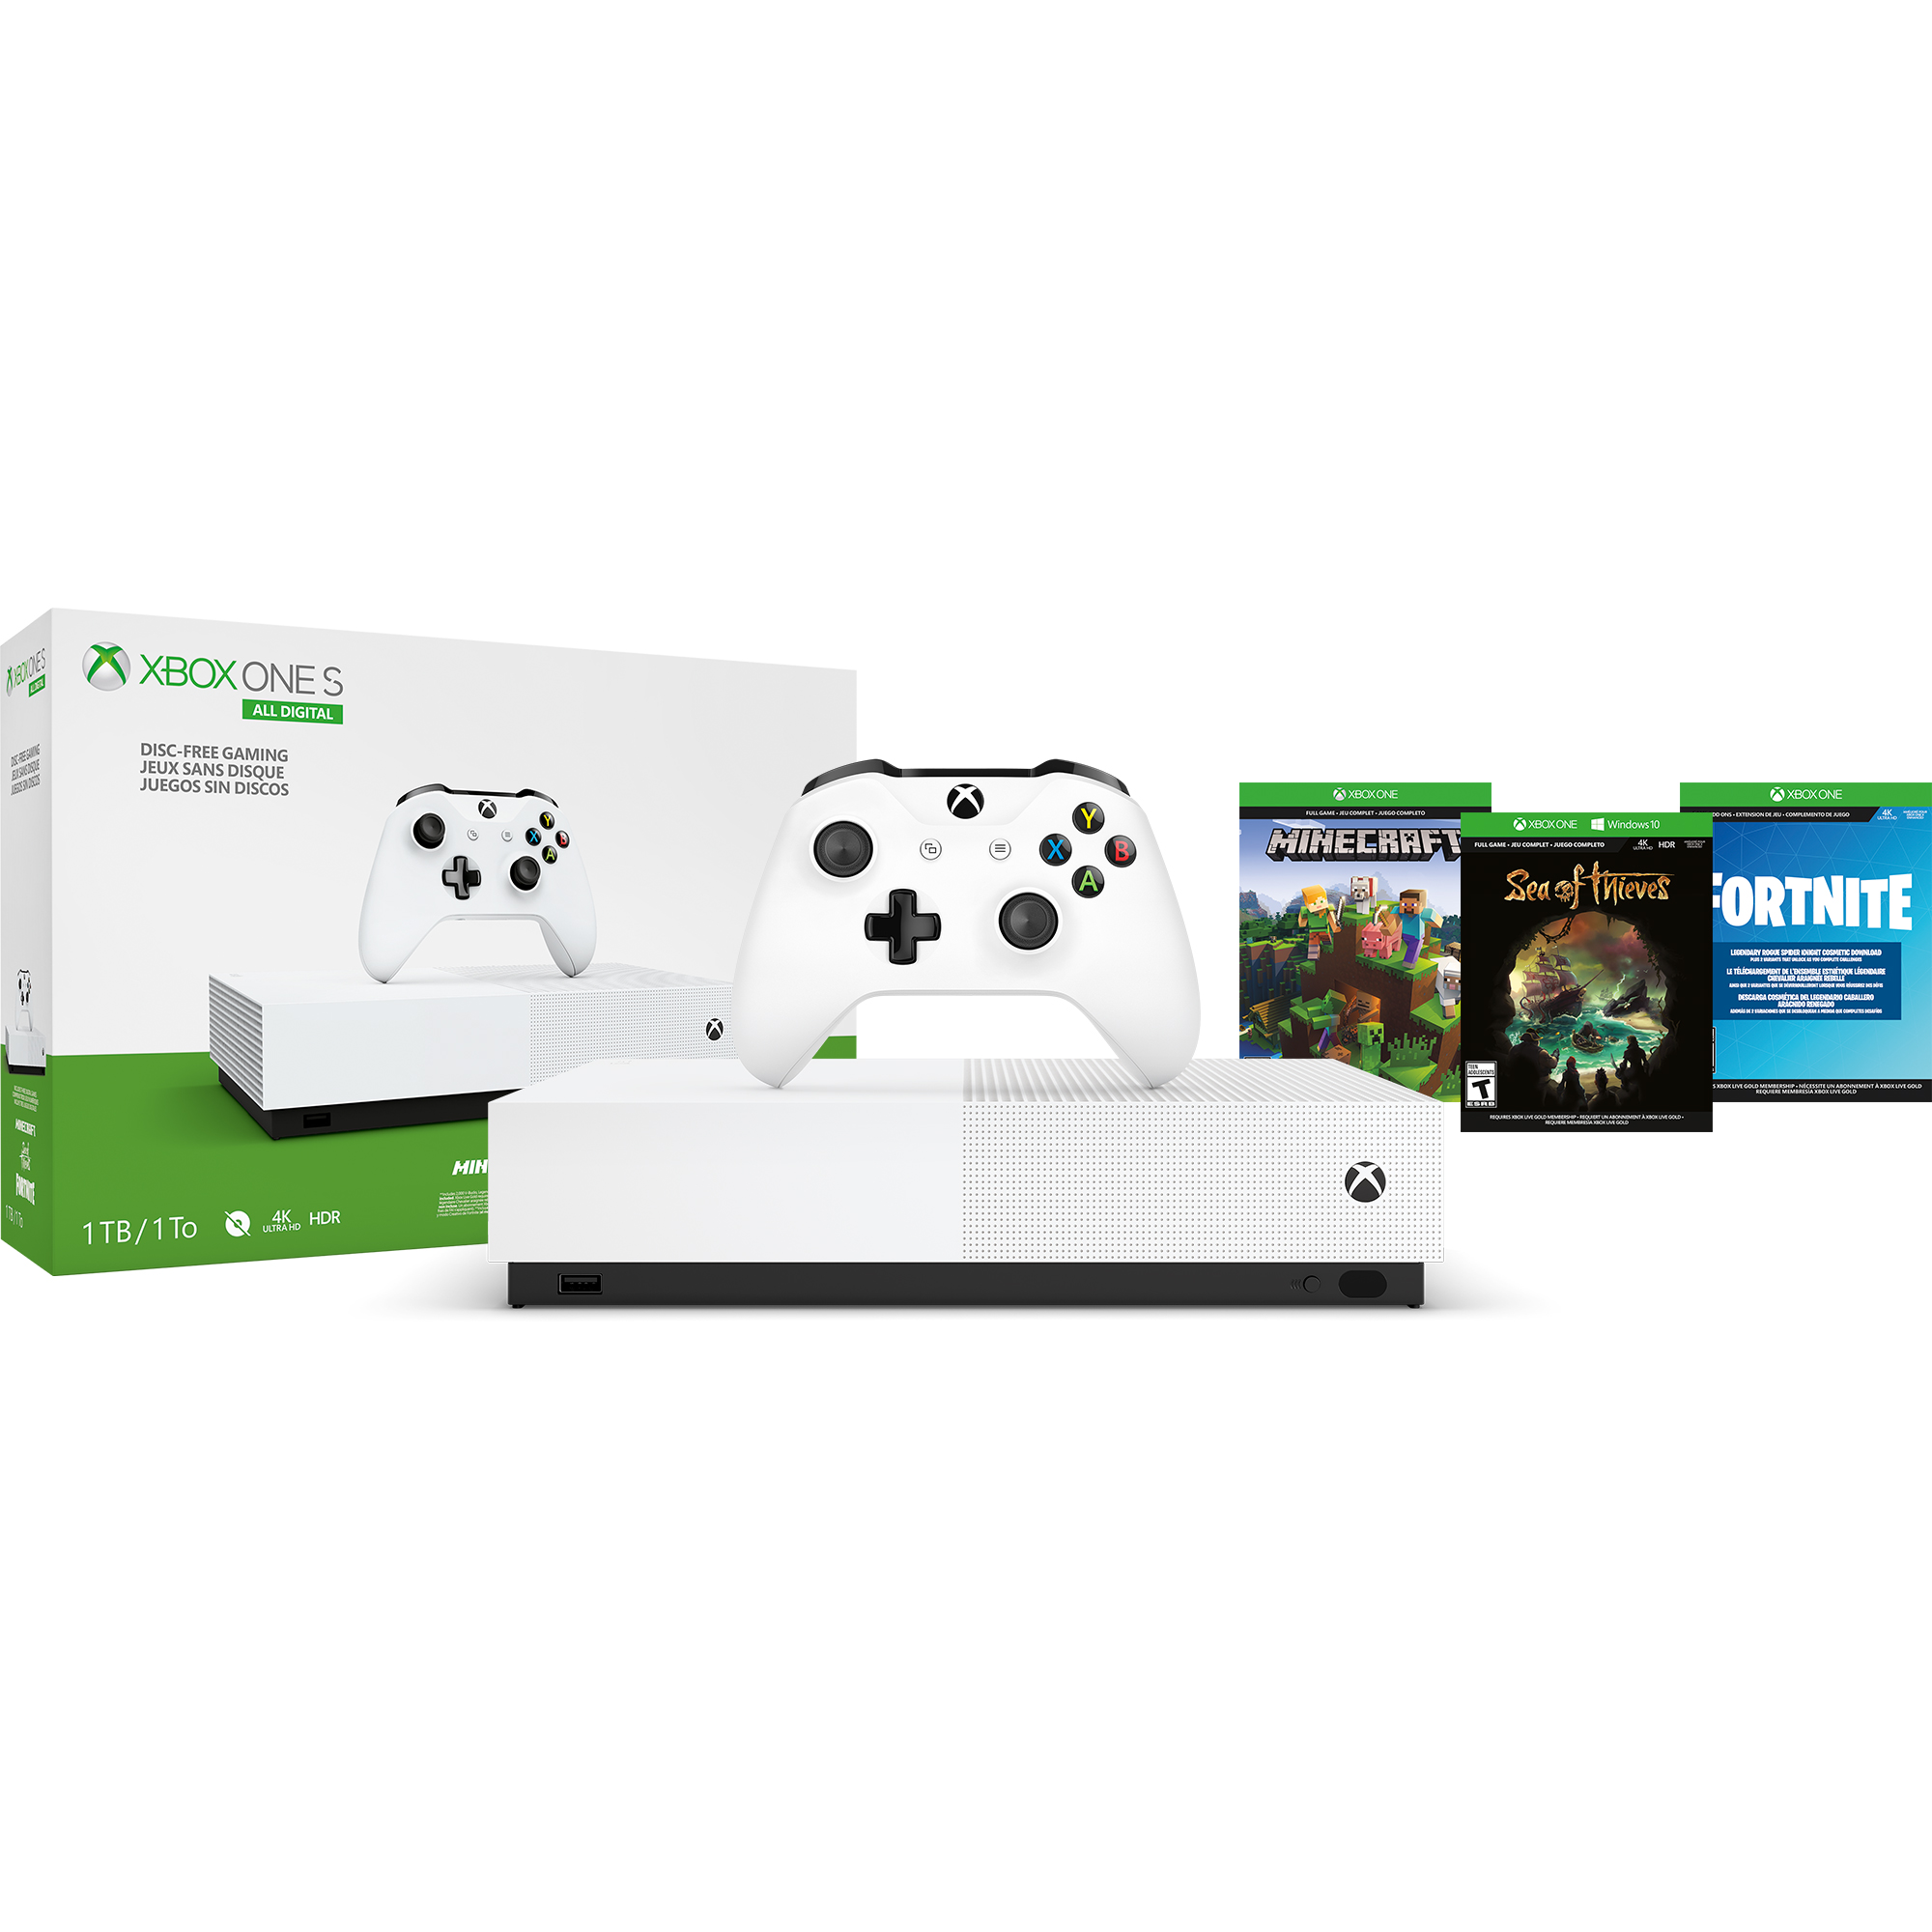 Microsoft Xbox One S 1TB All Digital Edition 3 Game Bundle (Disc-free Gaming), White, NJP-00050 - image 3 of 13